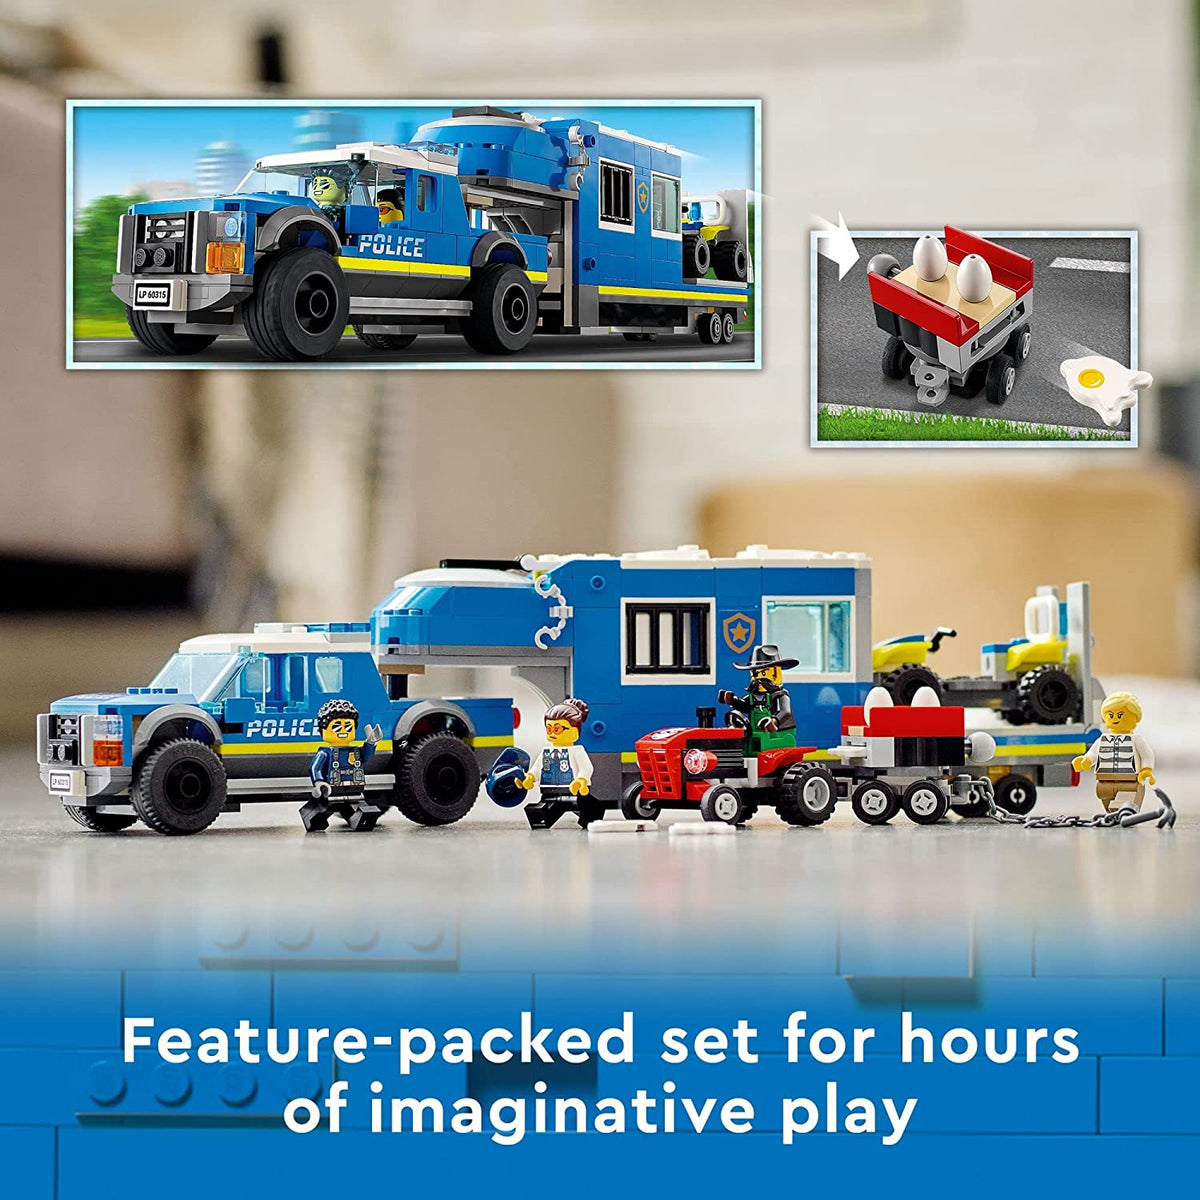 CITY 60315: Police Mobile Command Truck